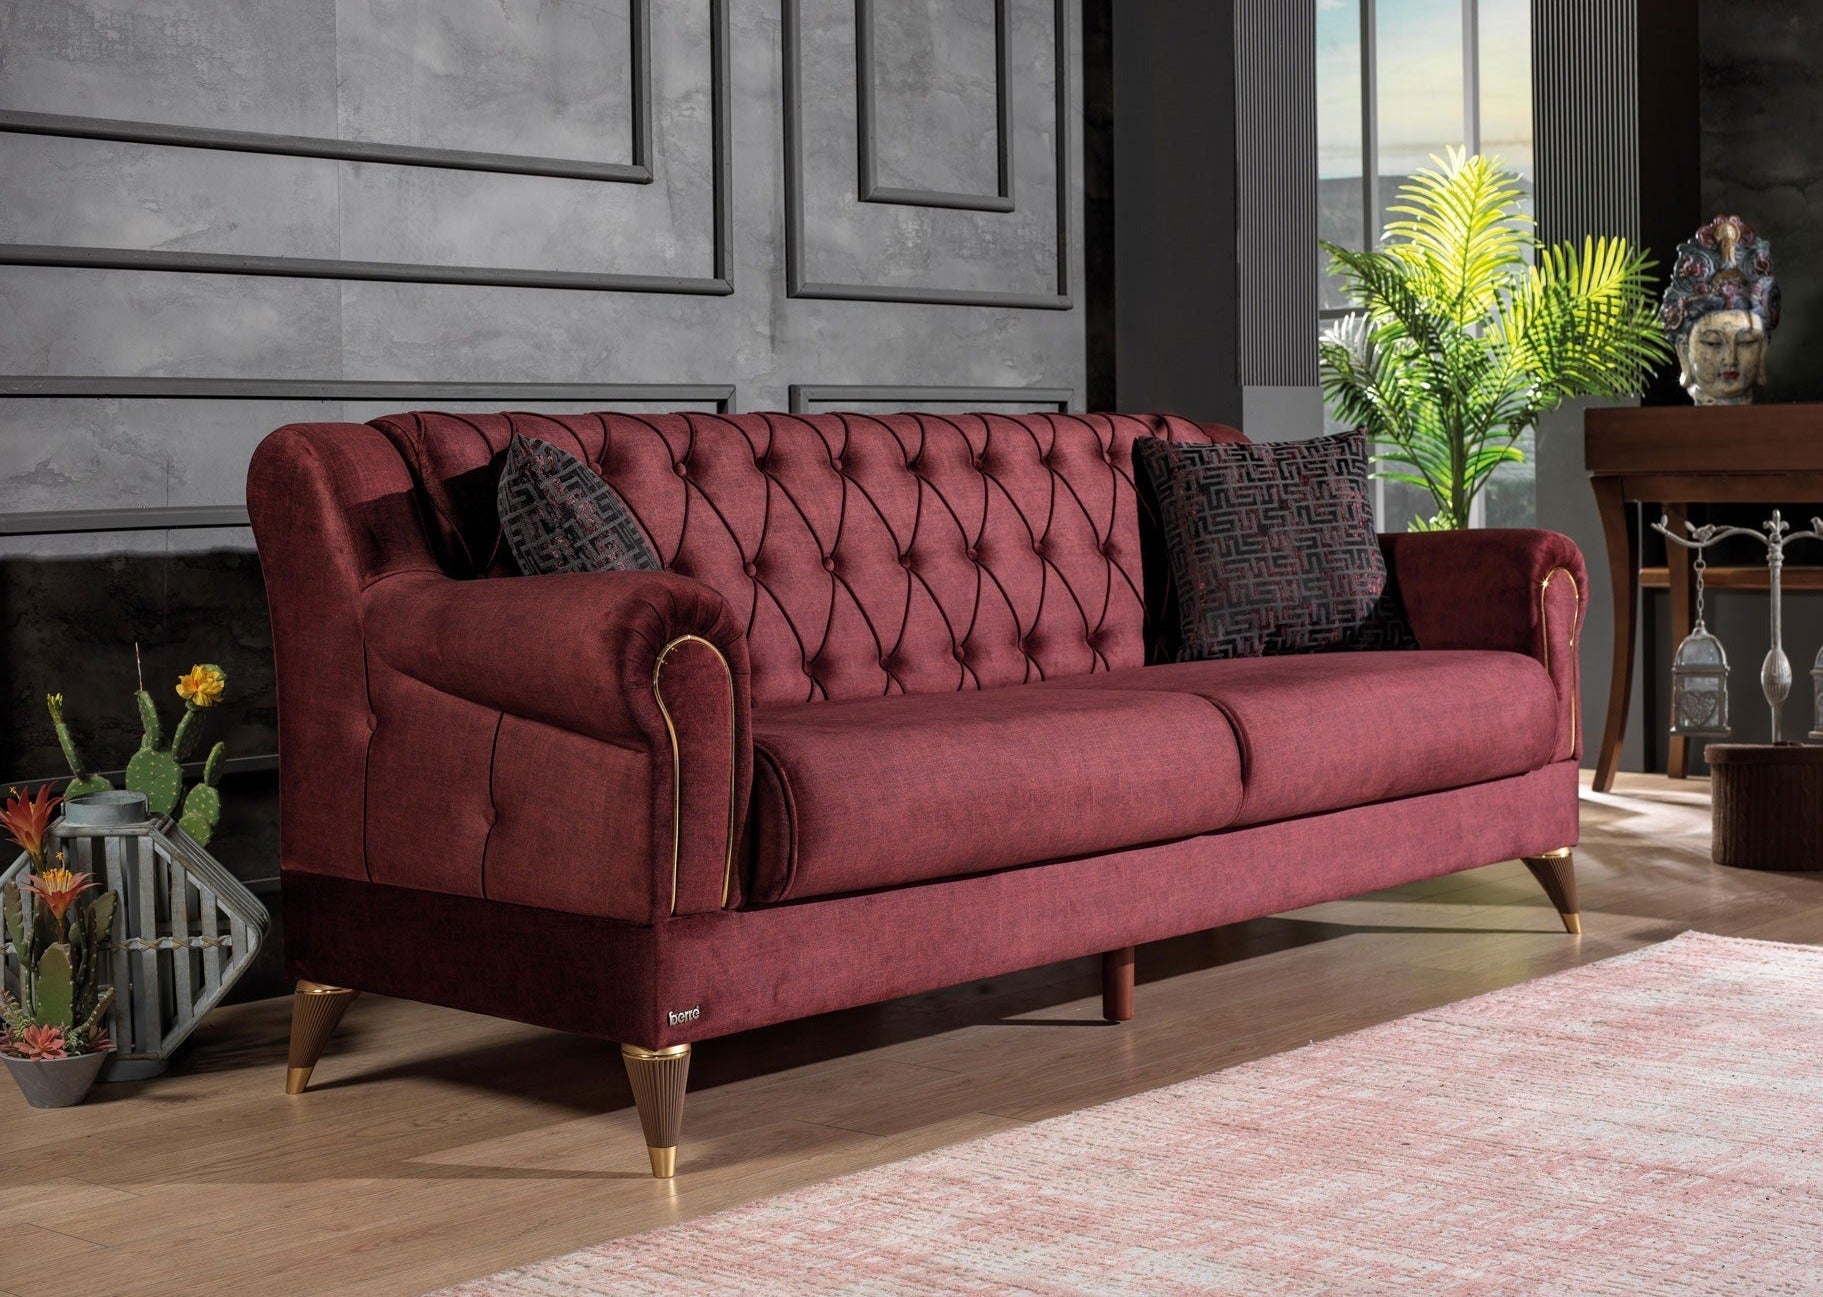 MONTANA Couch - Berre Furniture